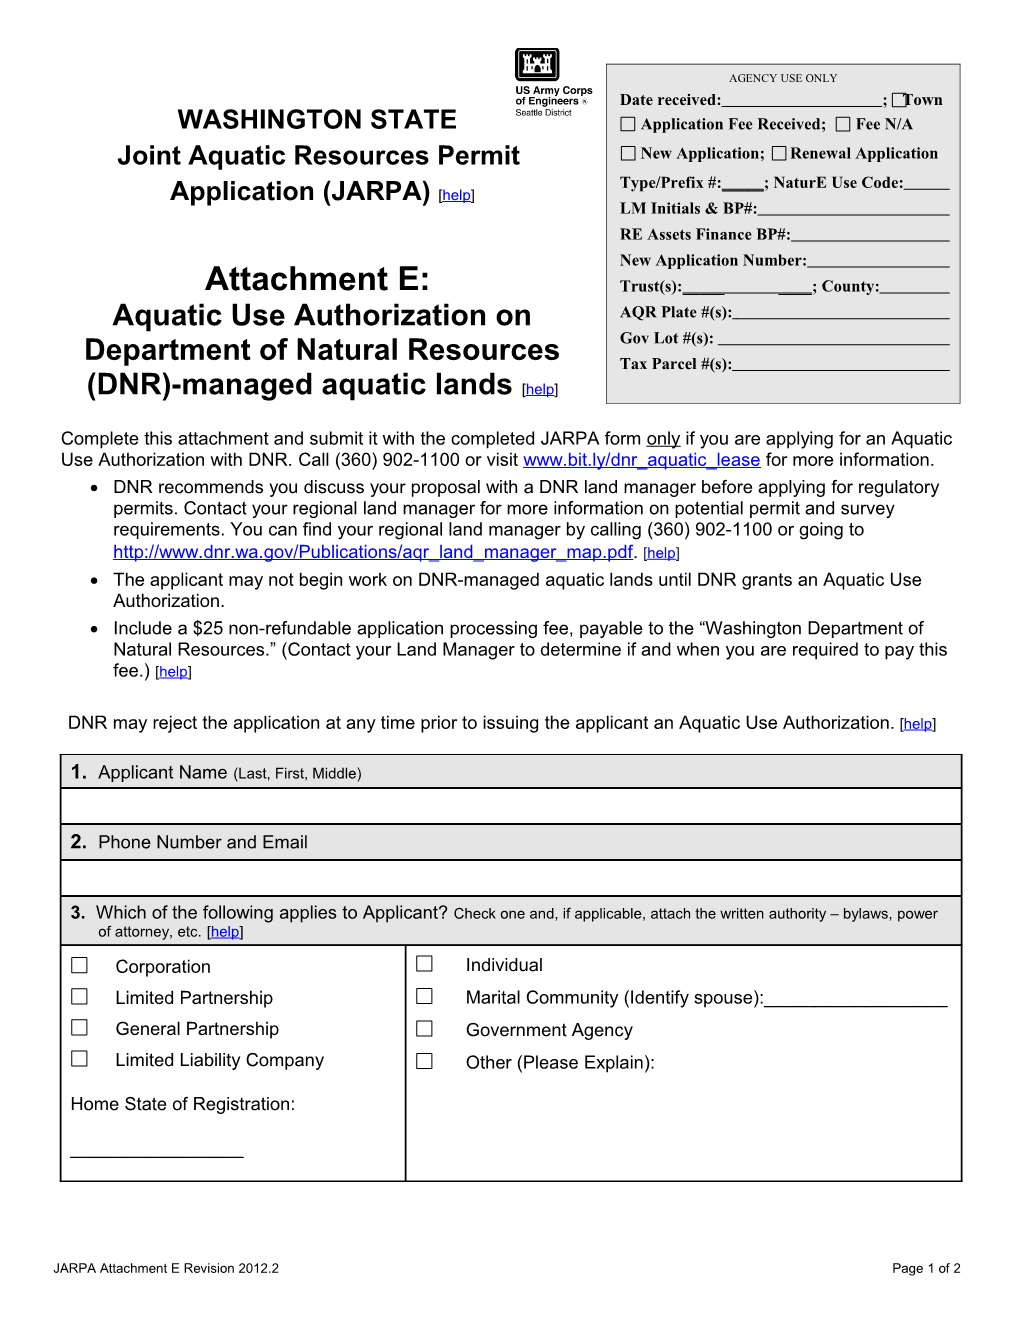 Aquatic Use Authorization on Department of Natural Resources (DNR)-Managedaquatic Lands Help